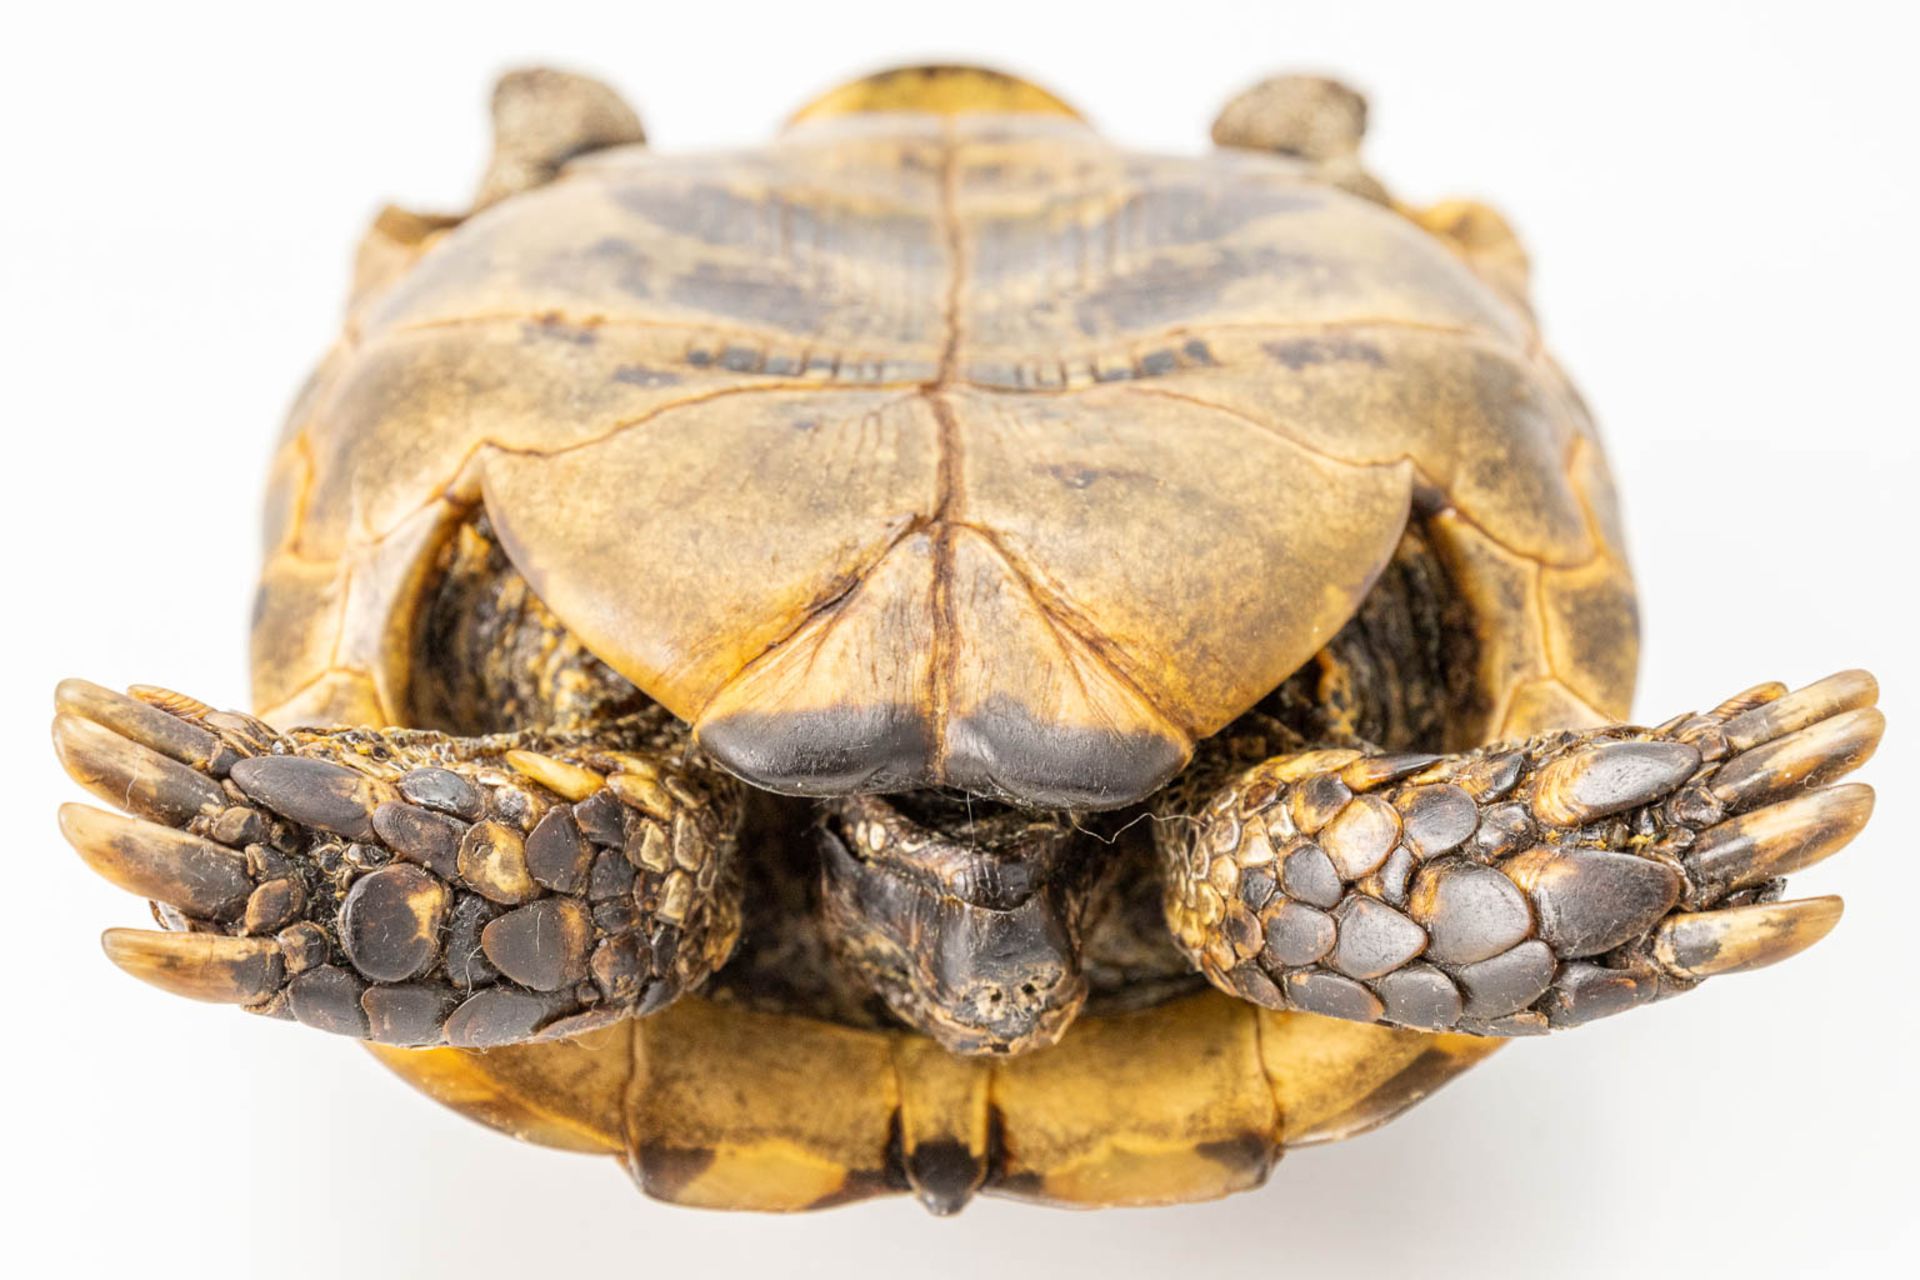 A vintage dried tortoise. - Image 6 of 11